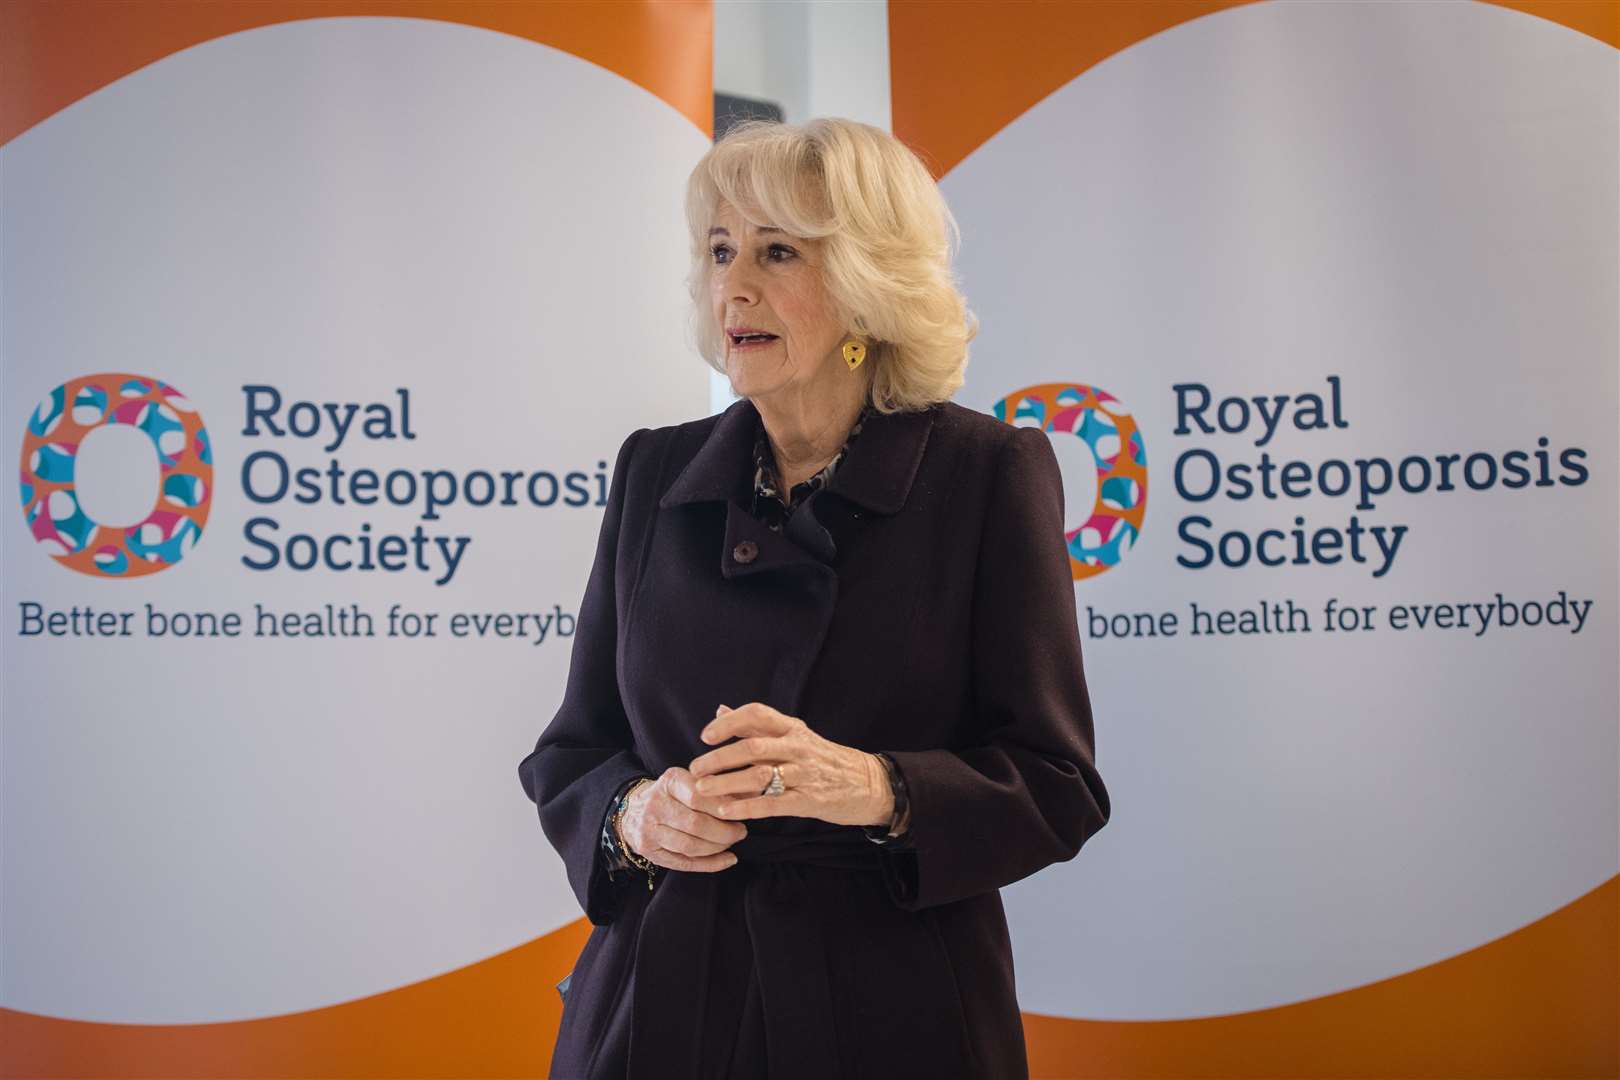 Camilla visited the newly-opened Royal Osteoporosis Society offices in Bath earlier on Wednesday (Polly Thomas/PA)